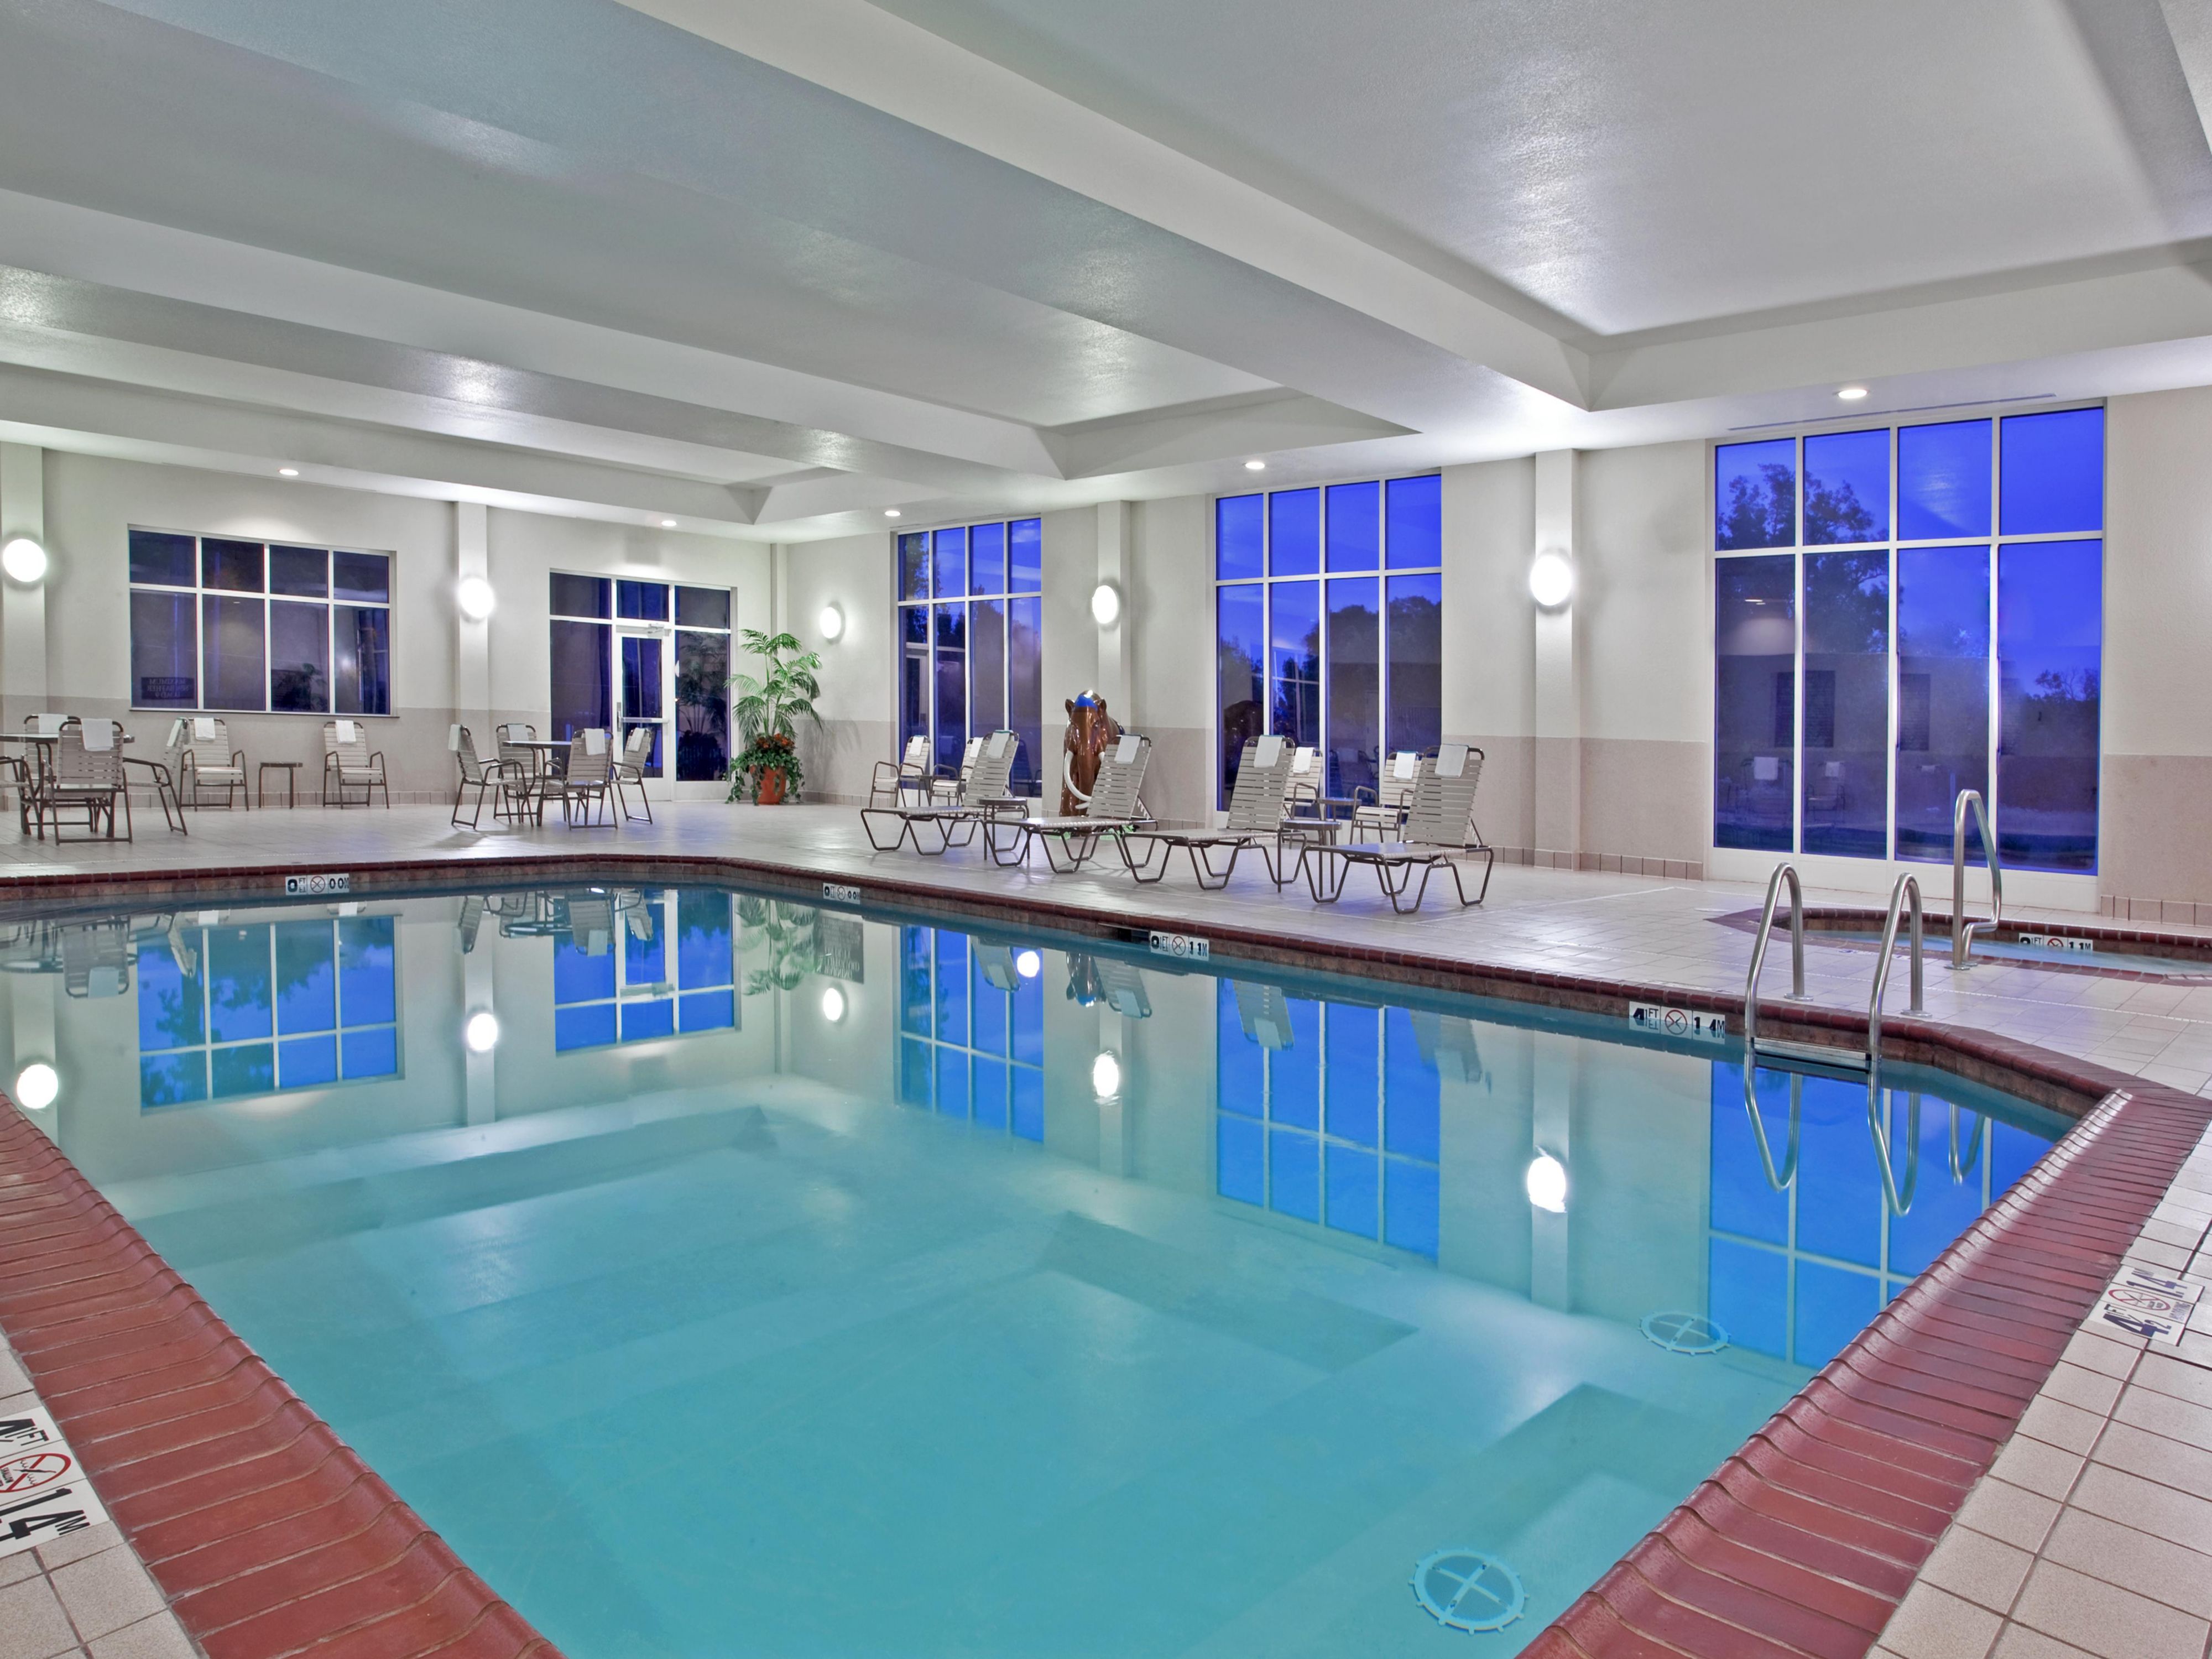 After a long day in town or in all day events or conferences, a nice swim is just what the body ordered.  Our pool facility is one of the largest for a hotel in the area. Coupled with a workout facility that also includes limited free weights, we can help you achieve your workout goals while you are away from your hometown gym.